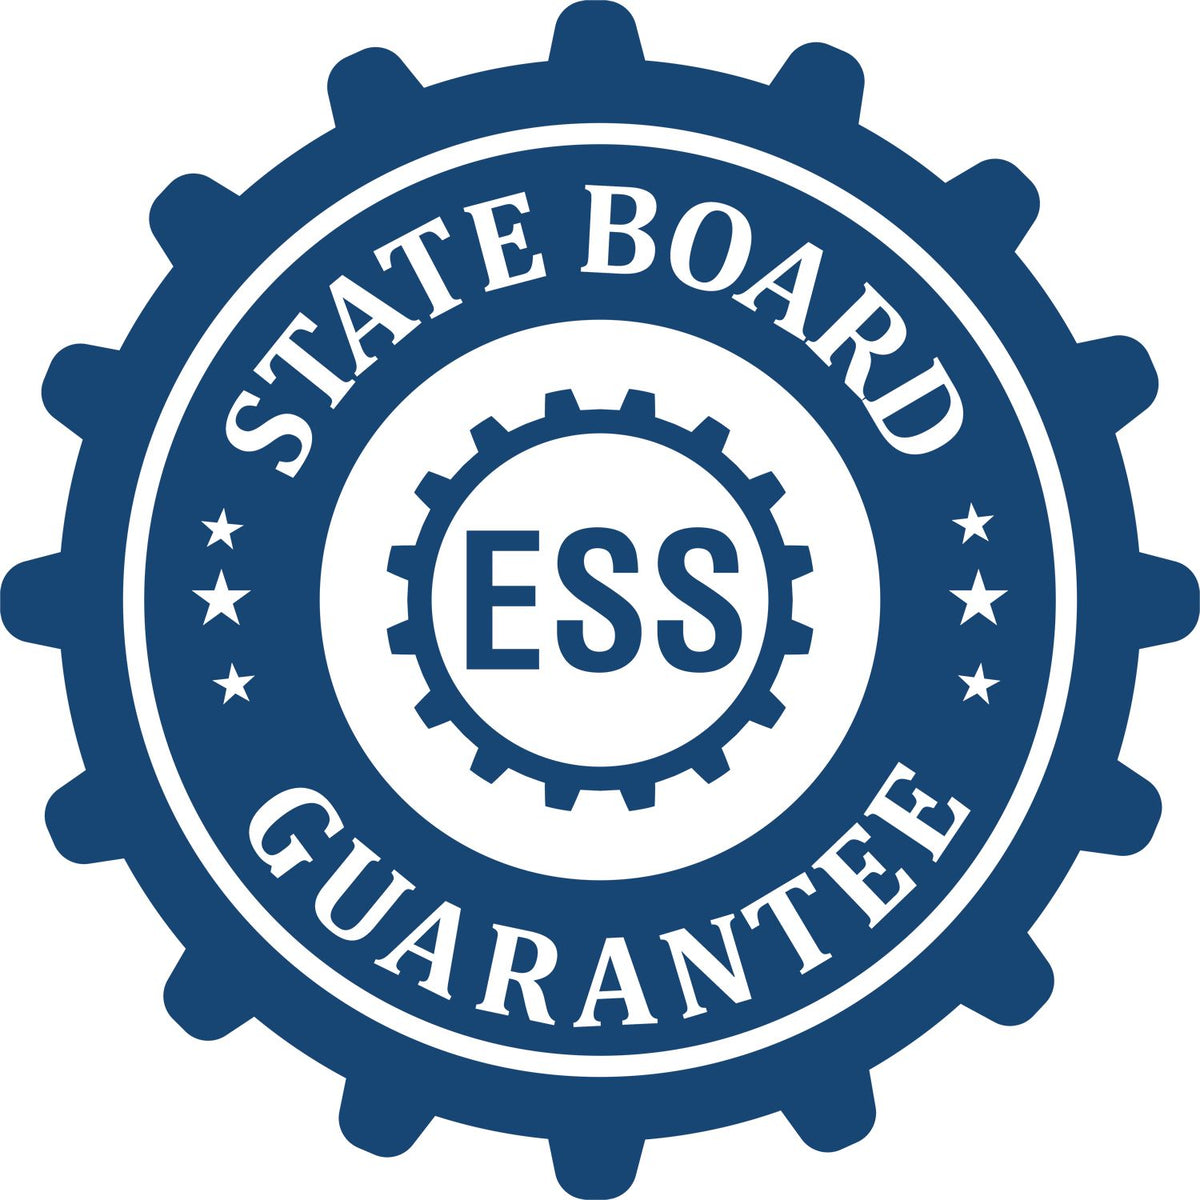 An emblem in a gear shape illustrating a state board guarantee for the Hybrid Hawaii Land Surveyor Seal